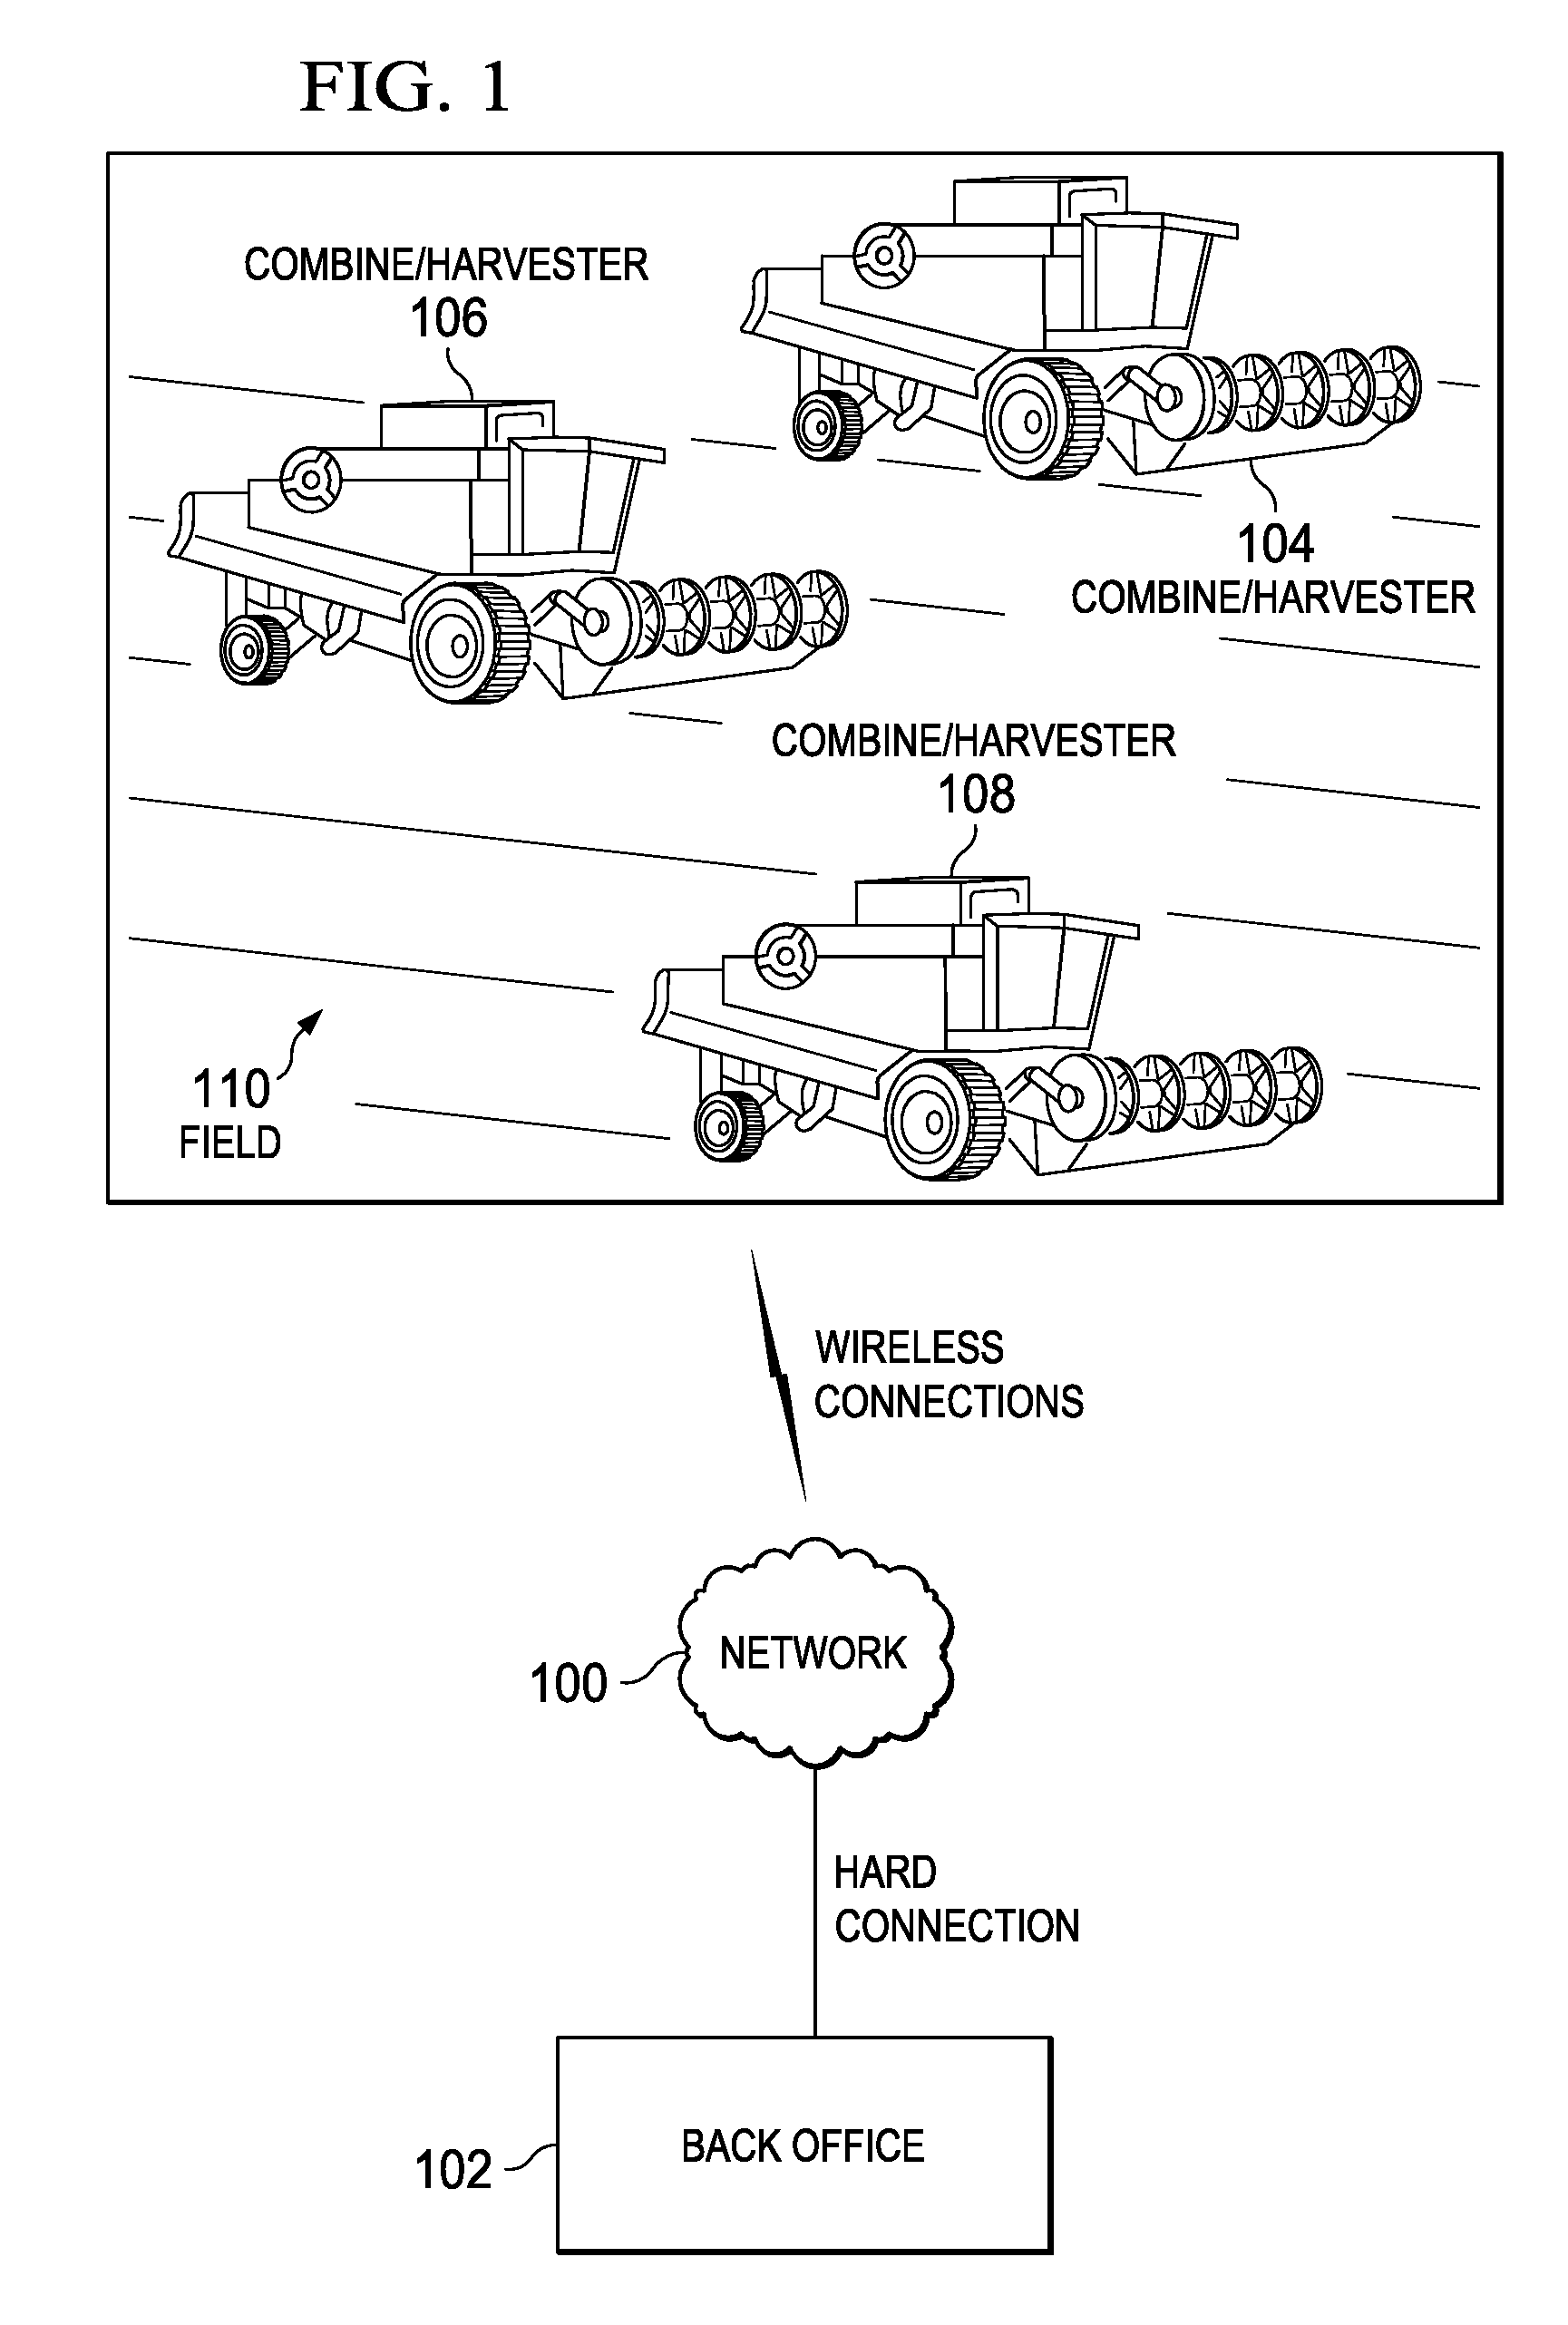 Vehicle with high integrity perception system